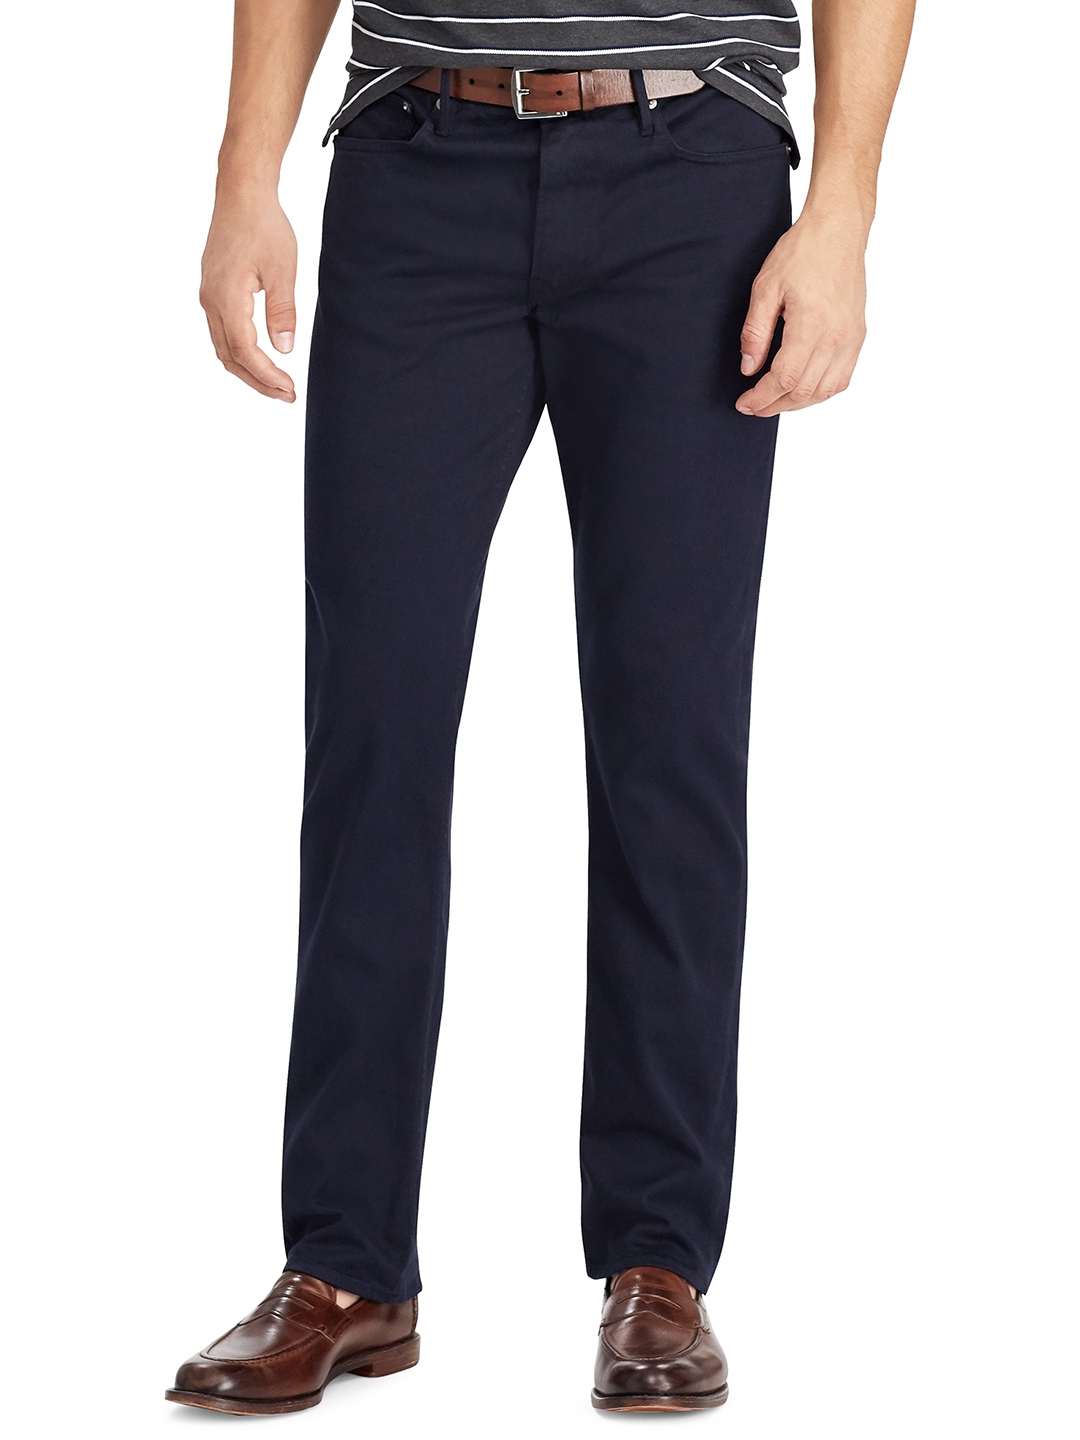 Buy Polo Ralph Lauren Prospect Straight Stretch Jeans - Jeans for Men  2091807 | Myntra